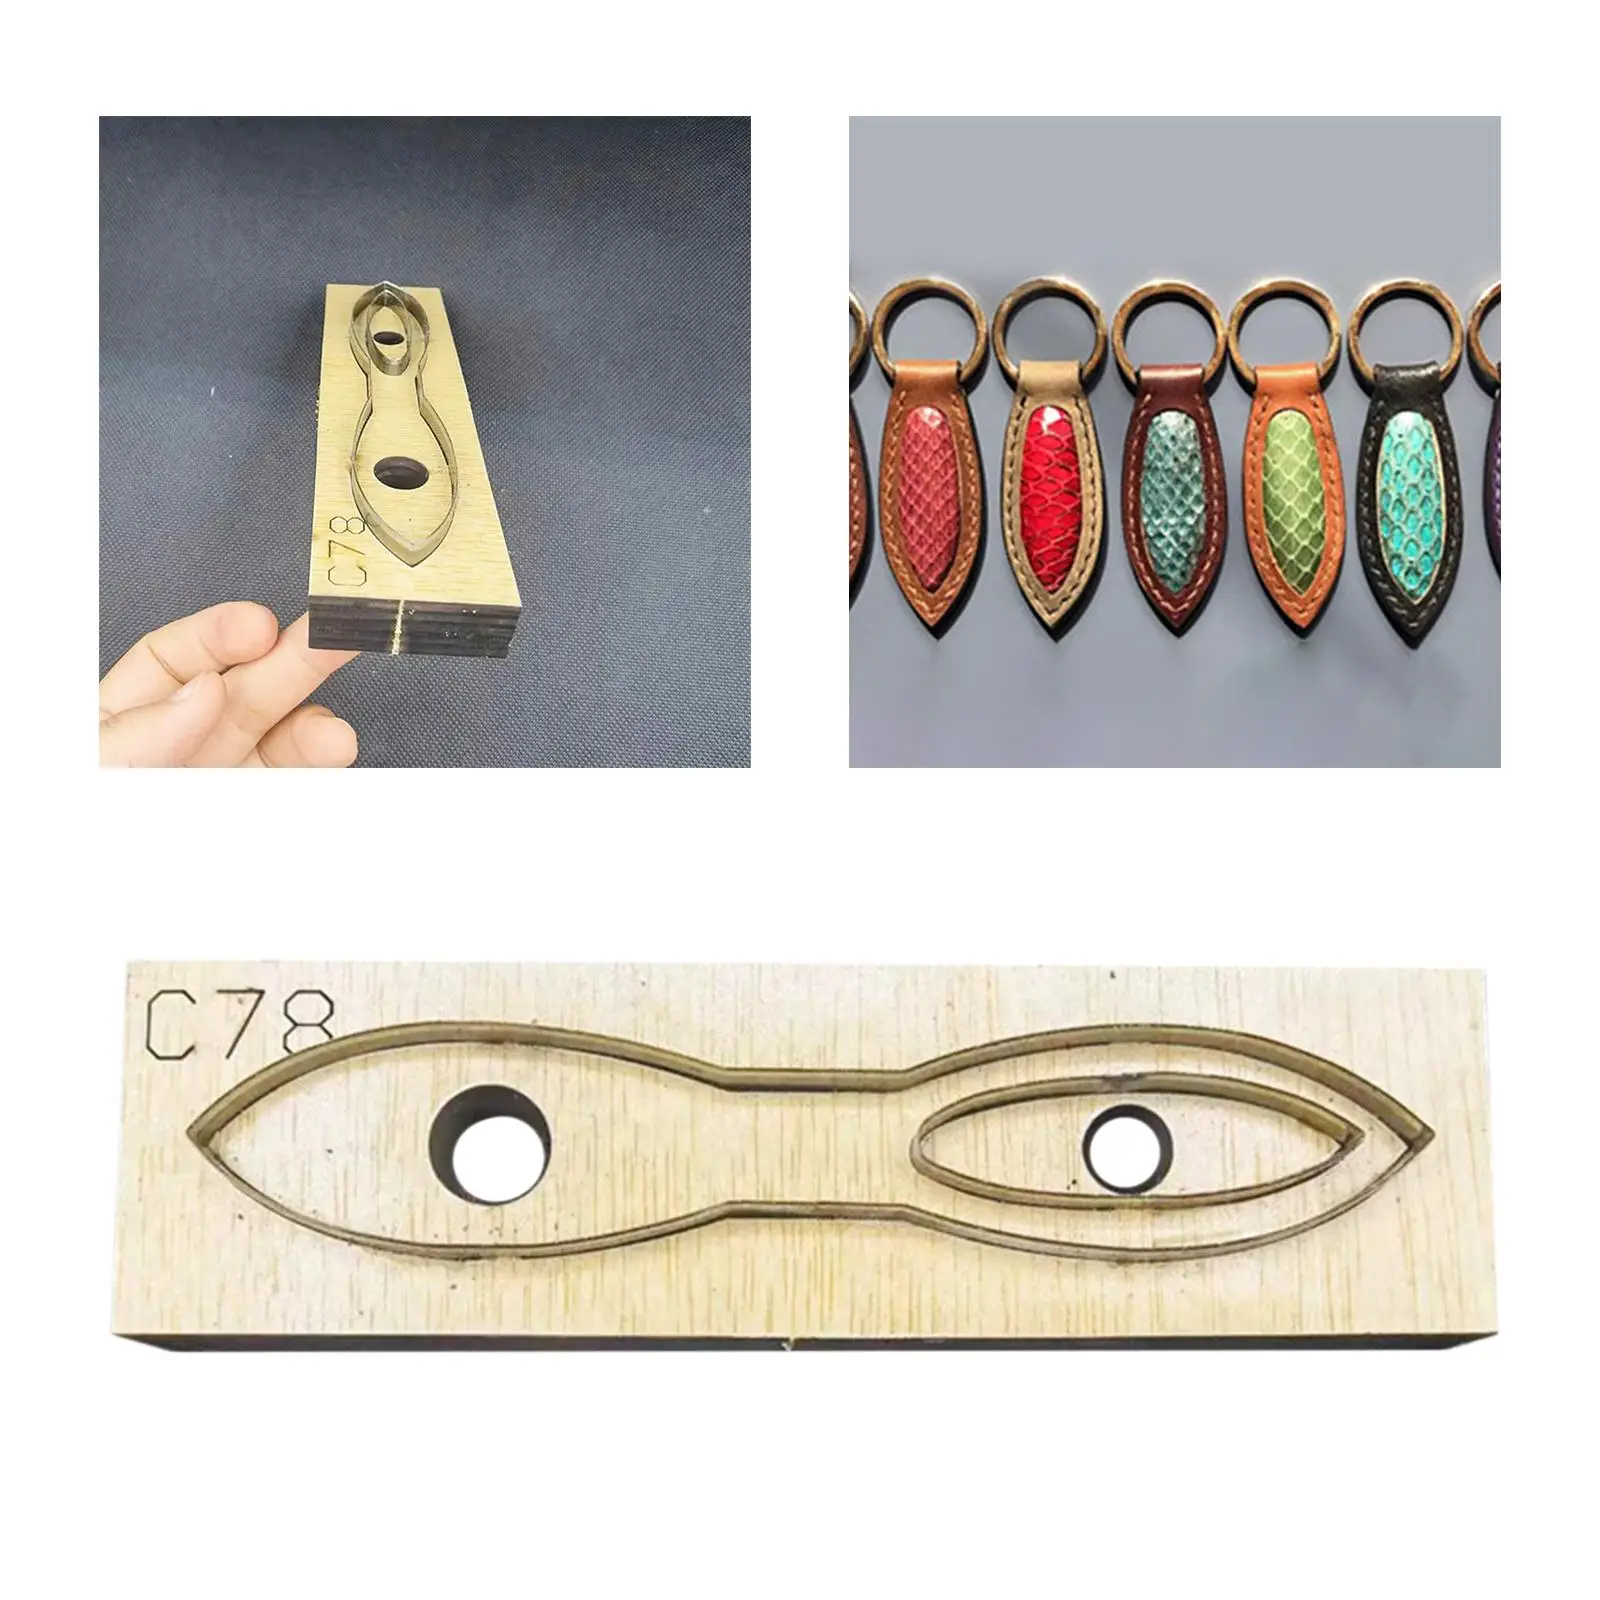 Leather Cutting Die Mold Handmade Zipper Head Leather Cutting Mold DIY for Purse Making Keychain Hanging Pendant Accessories